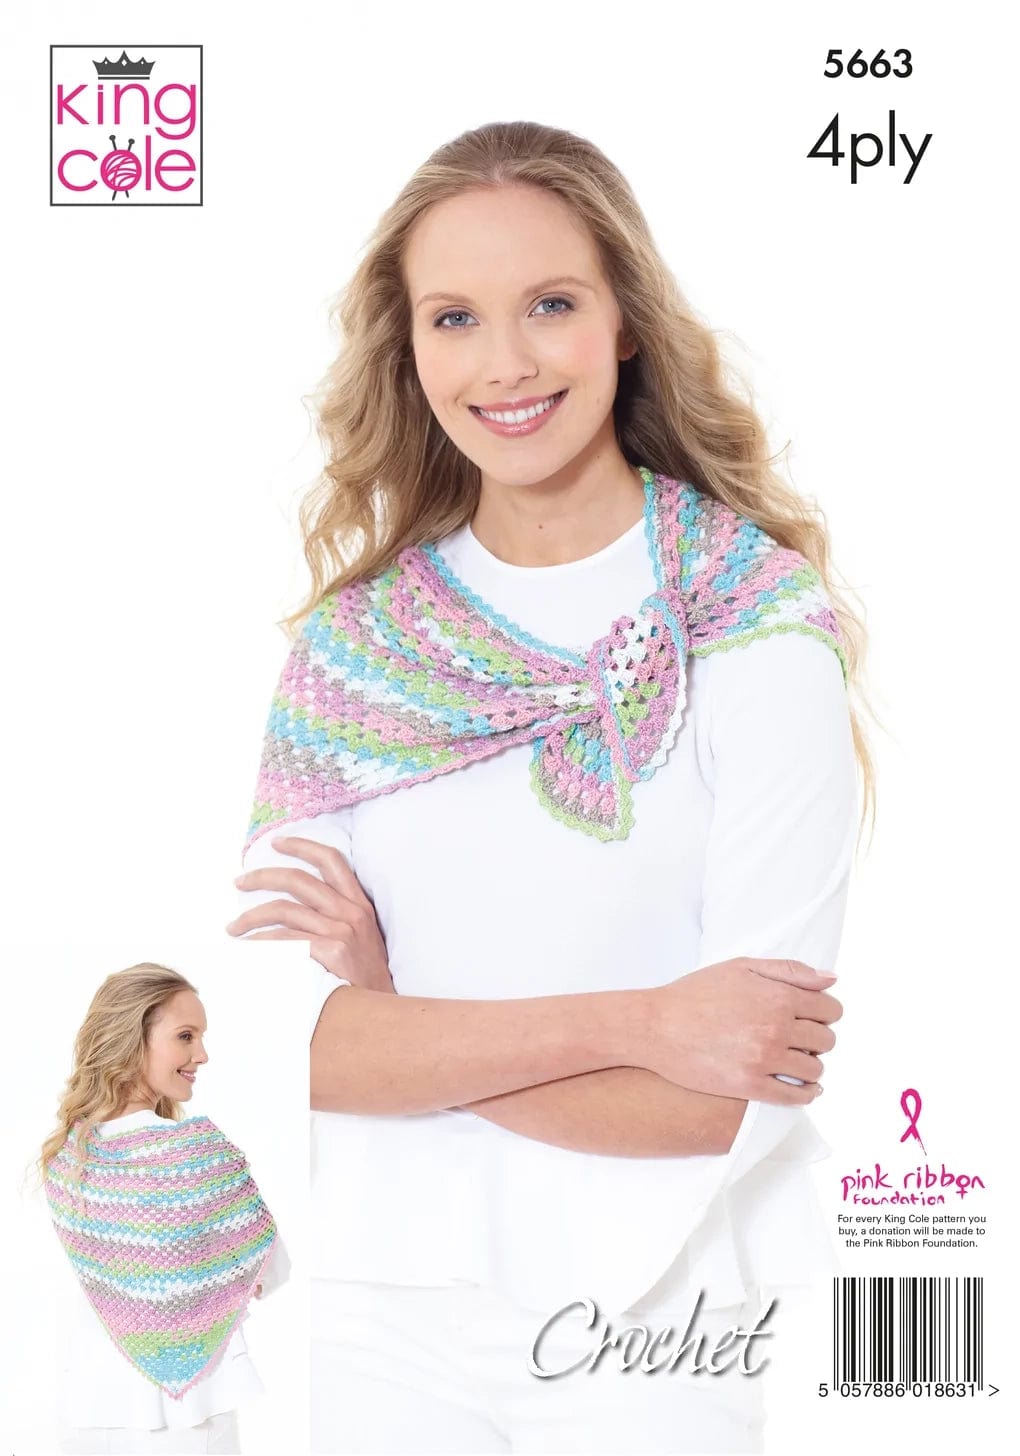 King Cole Patterns King Cole Summer 4 Ply - Scarf, Hat & Triangular Wrap (5663) 5057886018631